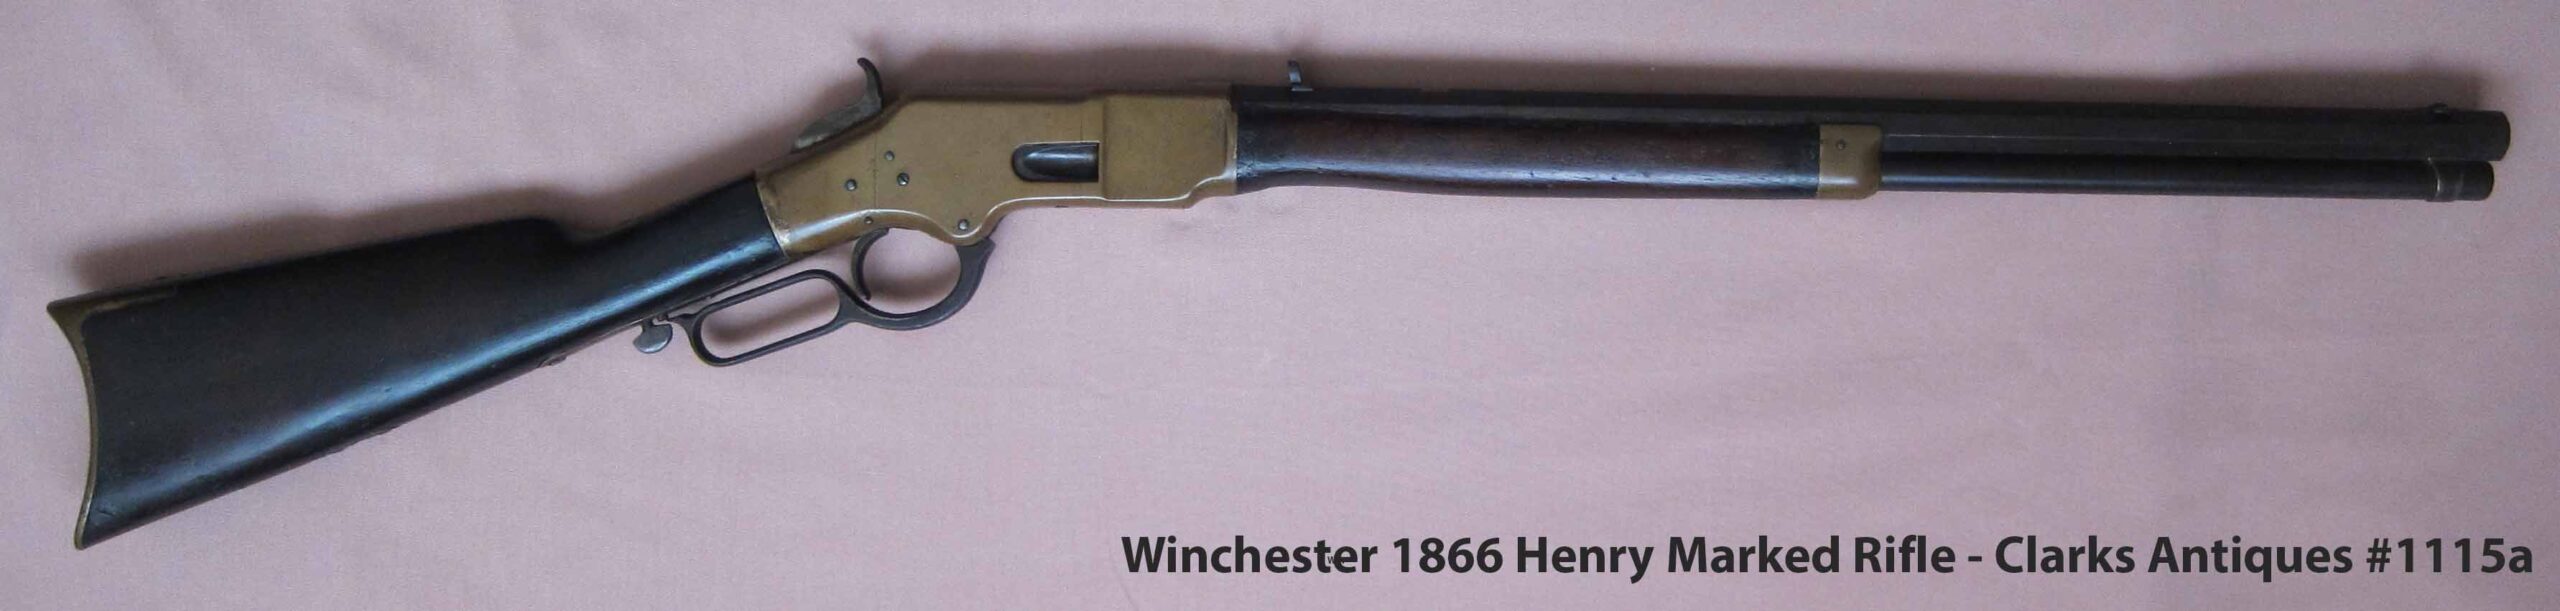 Winchester 1866 Henry Marked Rifle 